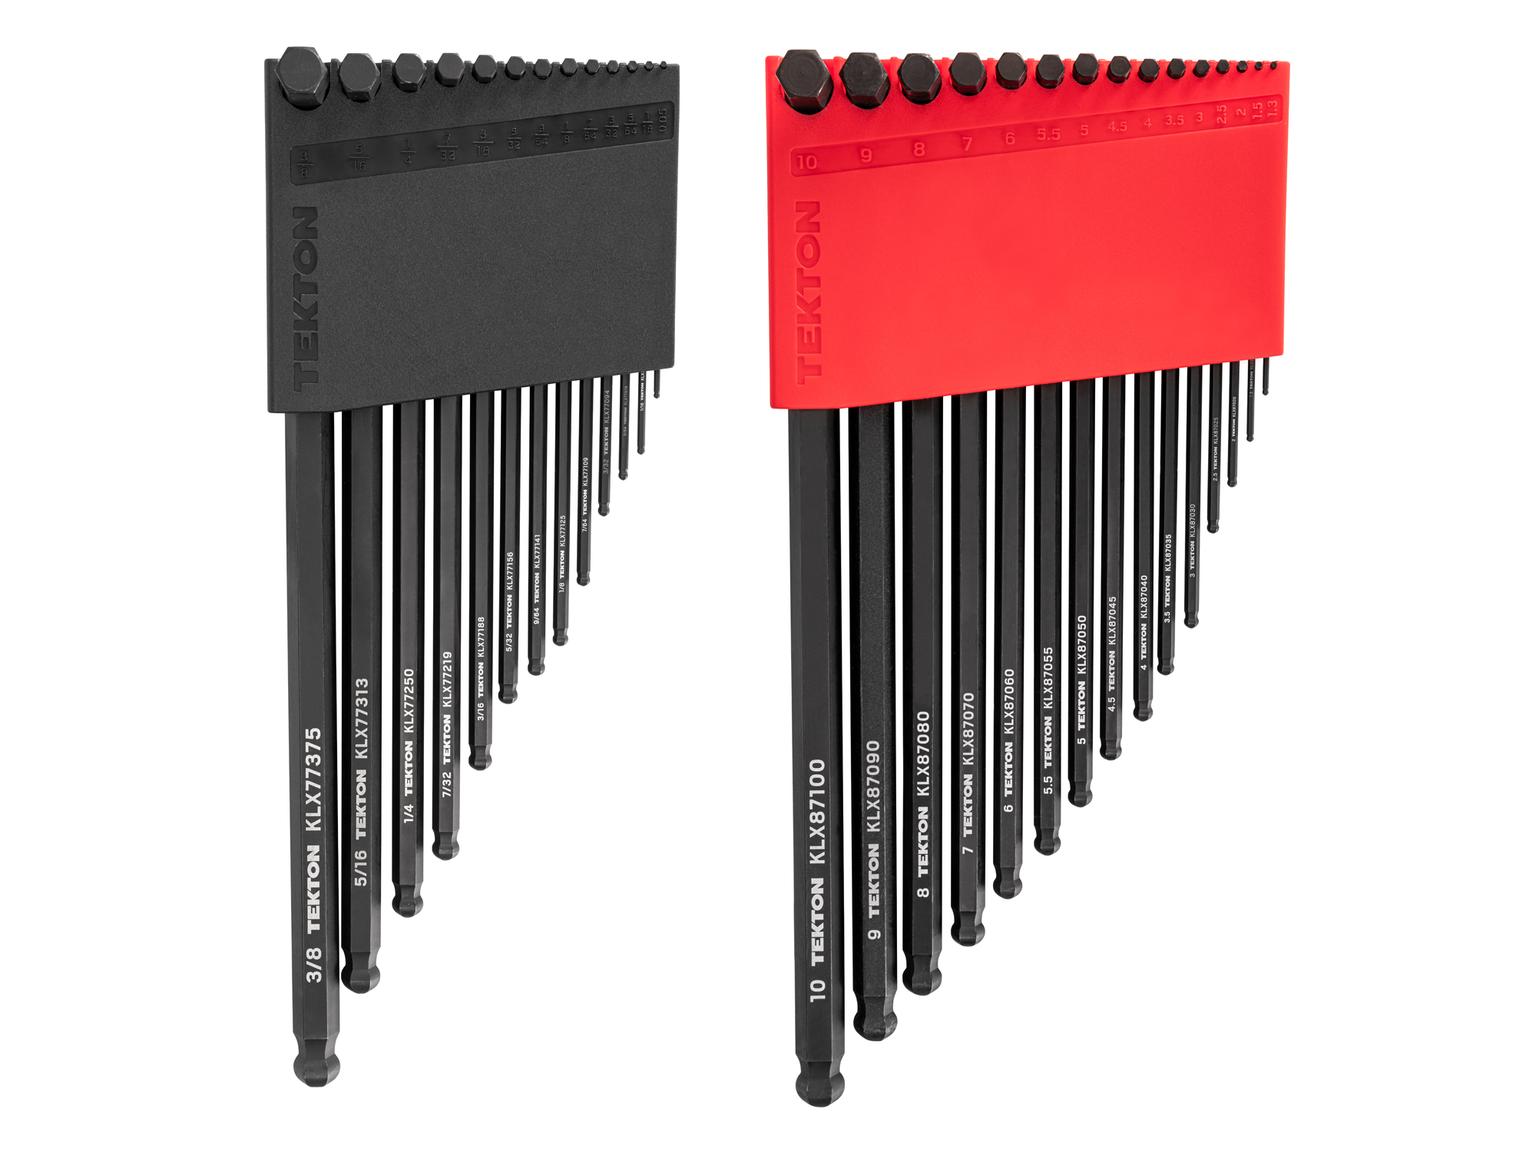 TEKTON KLX91312-D Short Arm Ball End Hex L-Key Set with Holder, 28-Piece (0.050-3/8 in., 1.3-10 mm)